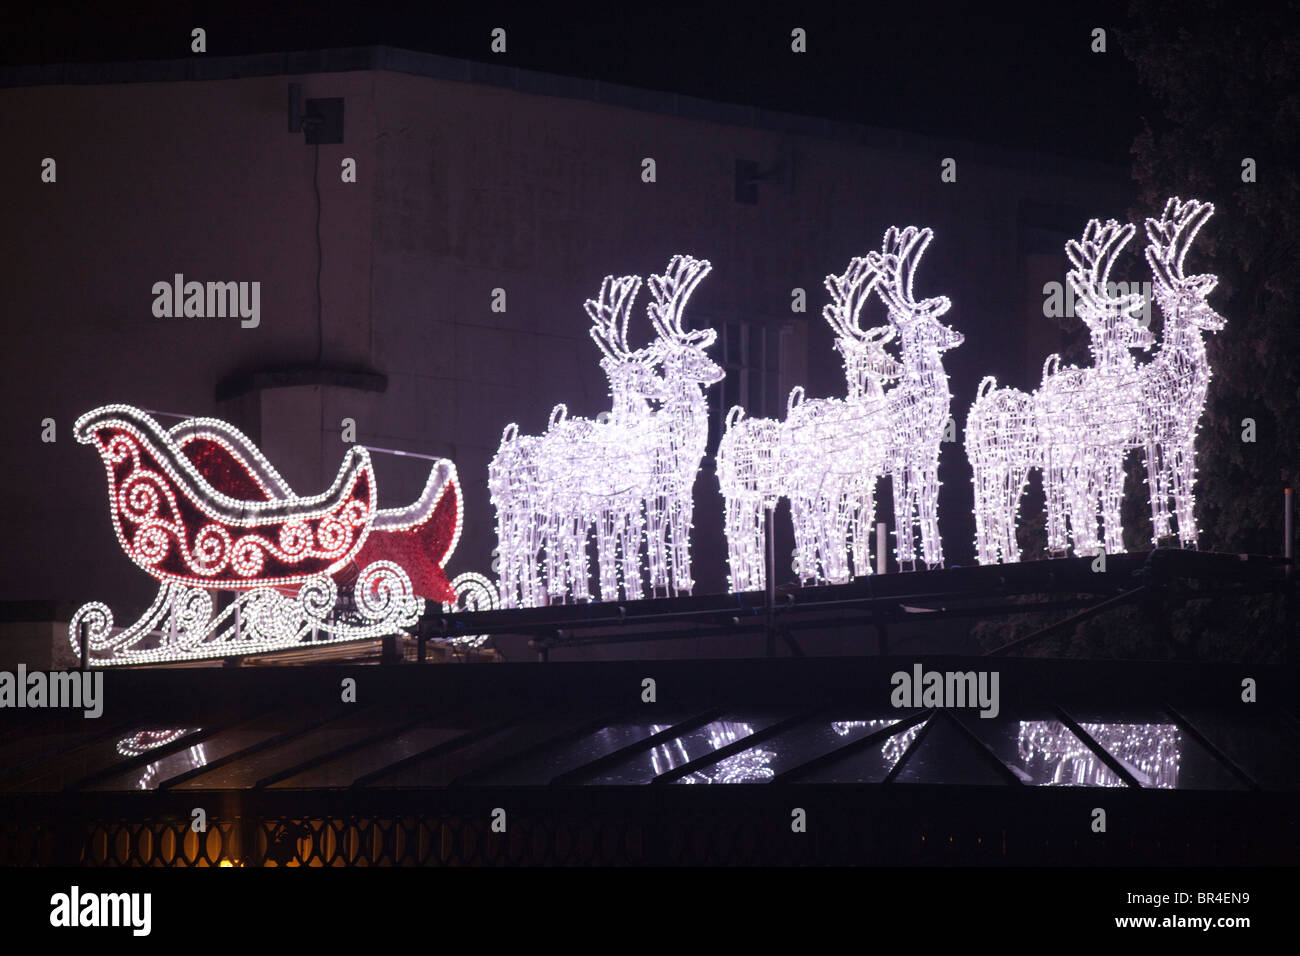 Outdoor christmas lights showing santa's sleigh and reindeer. Stock Photo